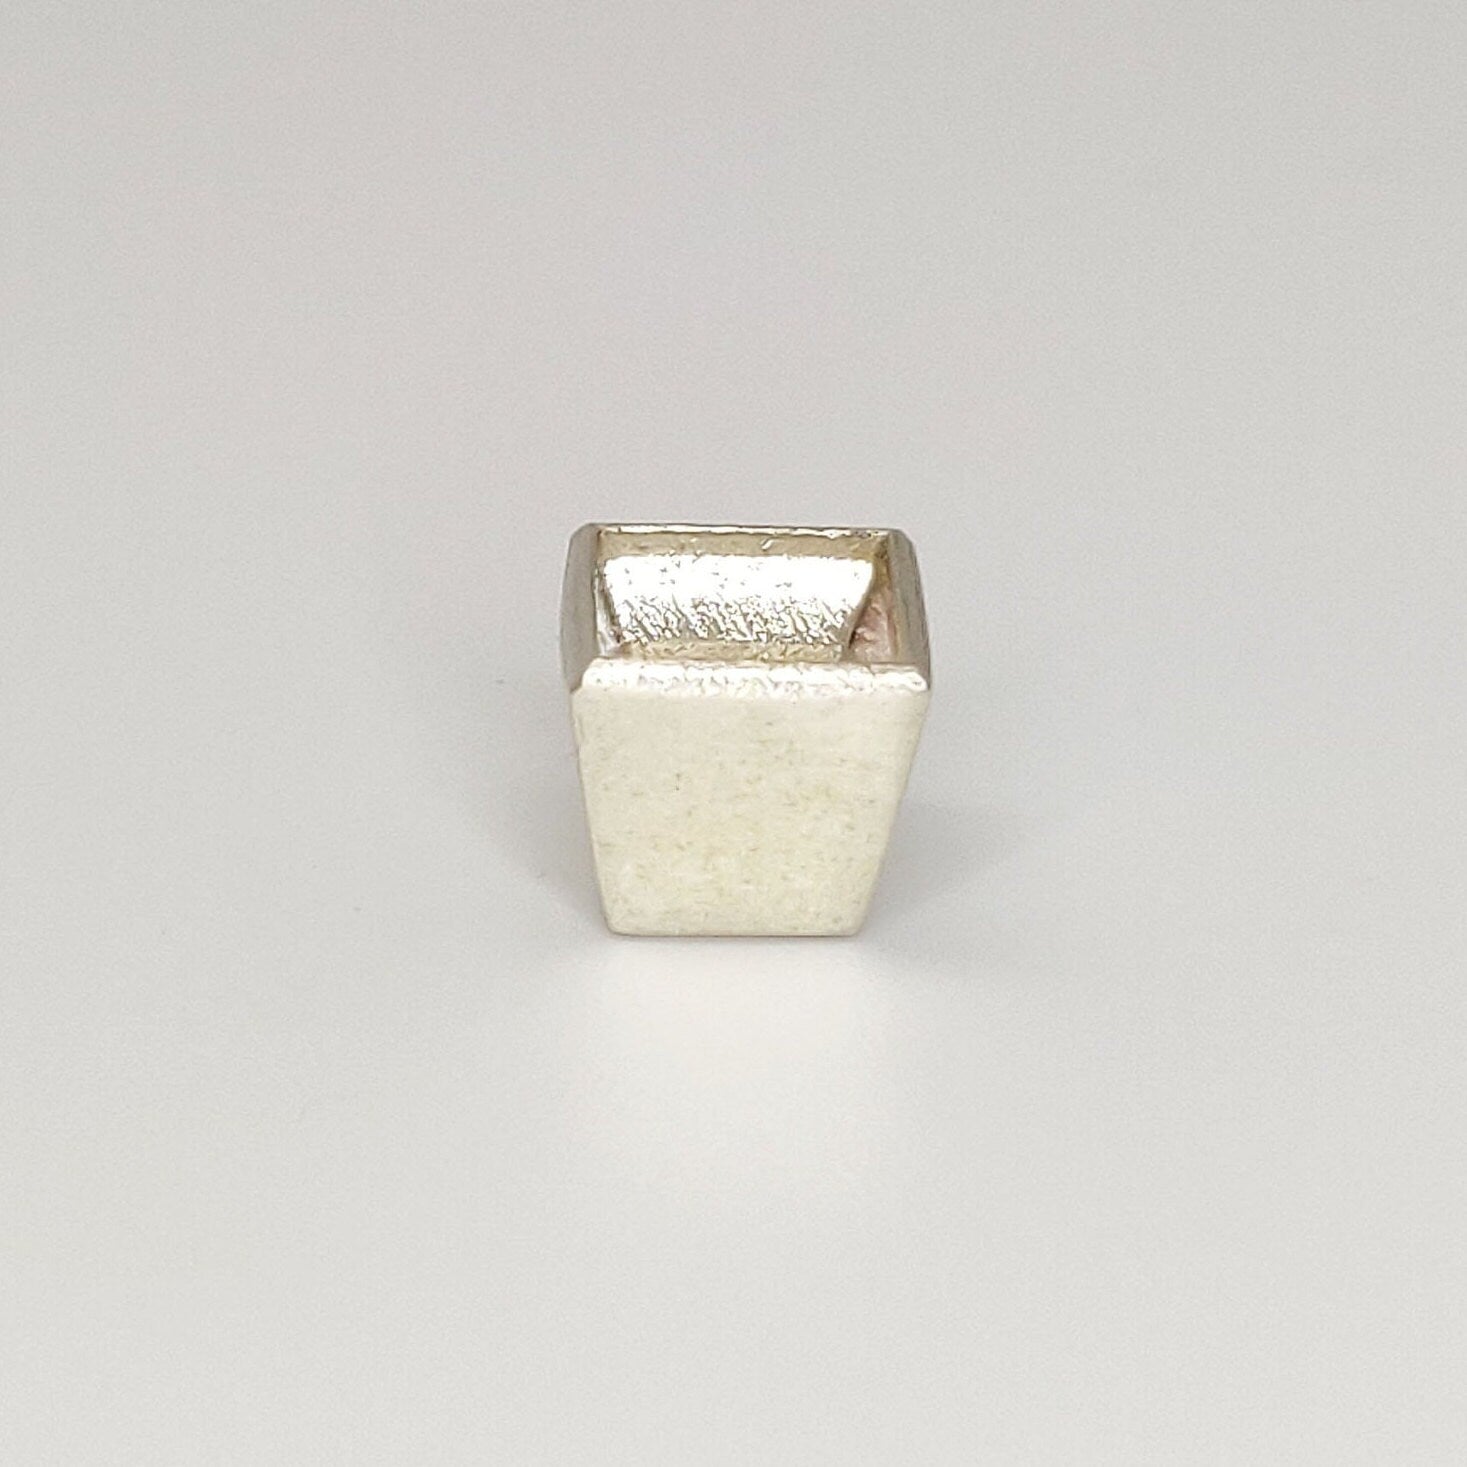 5mm Silver Princess Cut Gemstone Rubover Setting. Cast Recycled Silver Square Bezel. Jewelry Making Supplies. 9ct Yellow Gold Square Setting